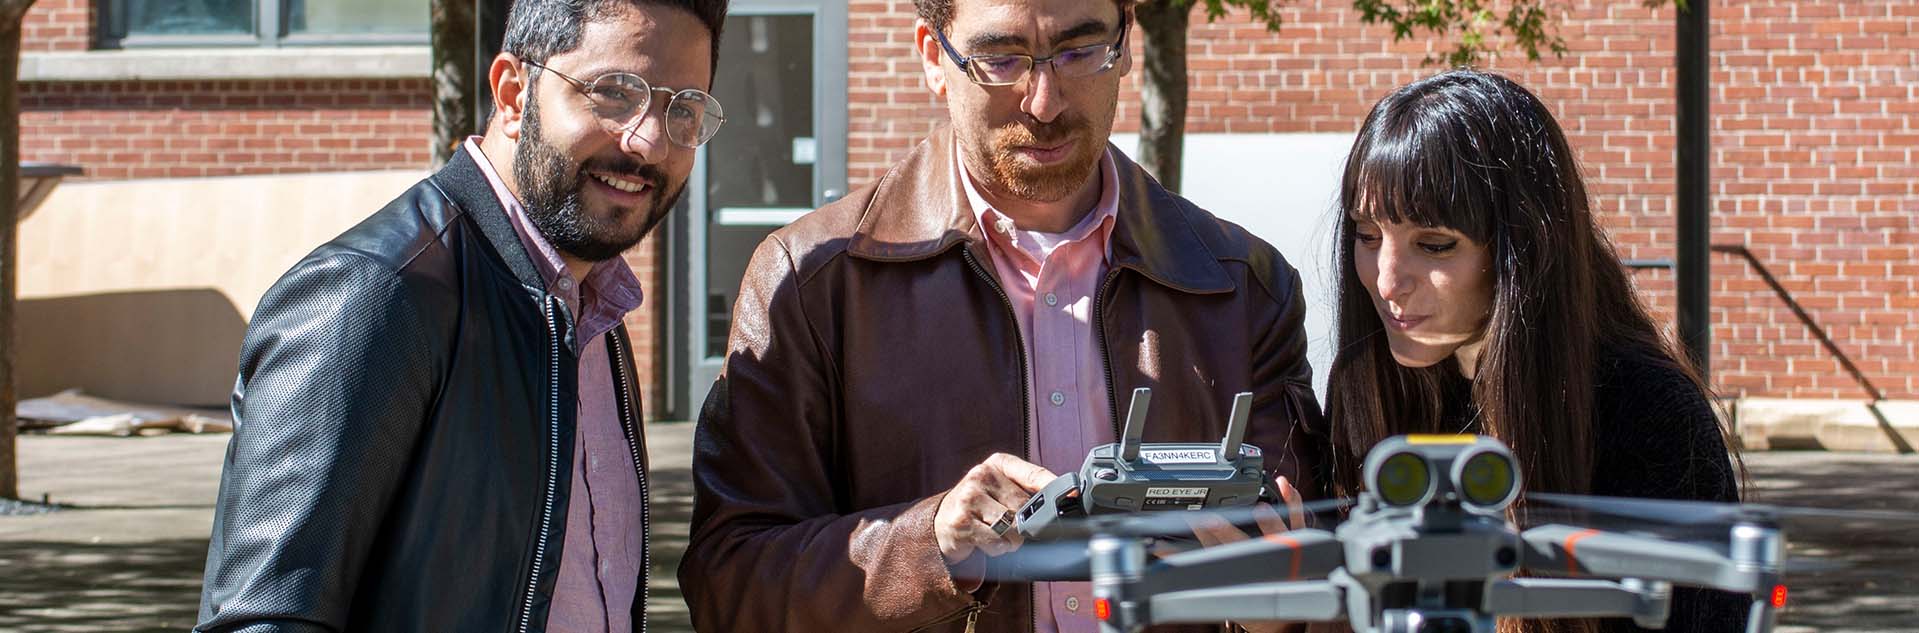 Tarek Rakha and High Performance Building Students Test Out New Drone